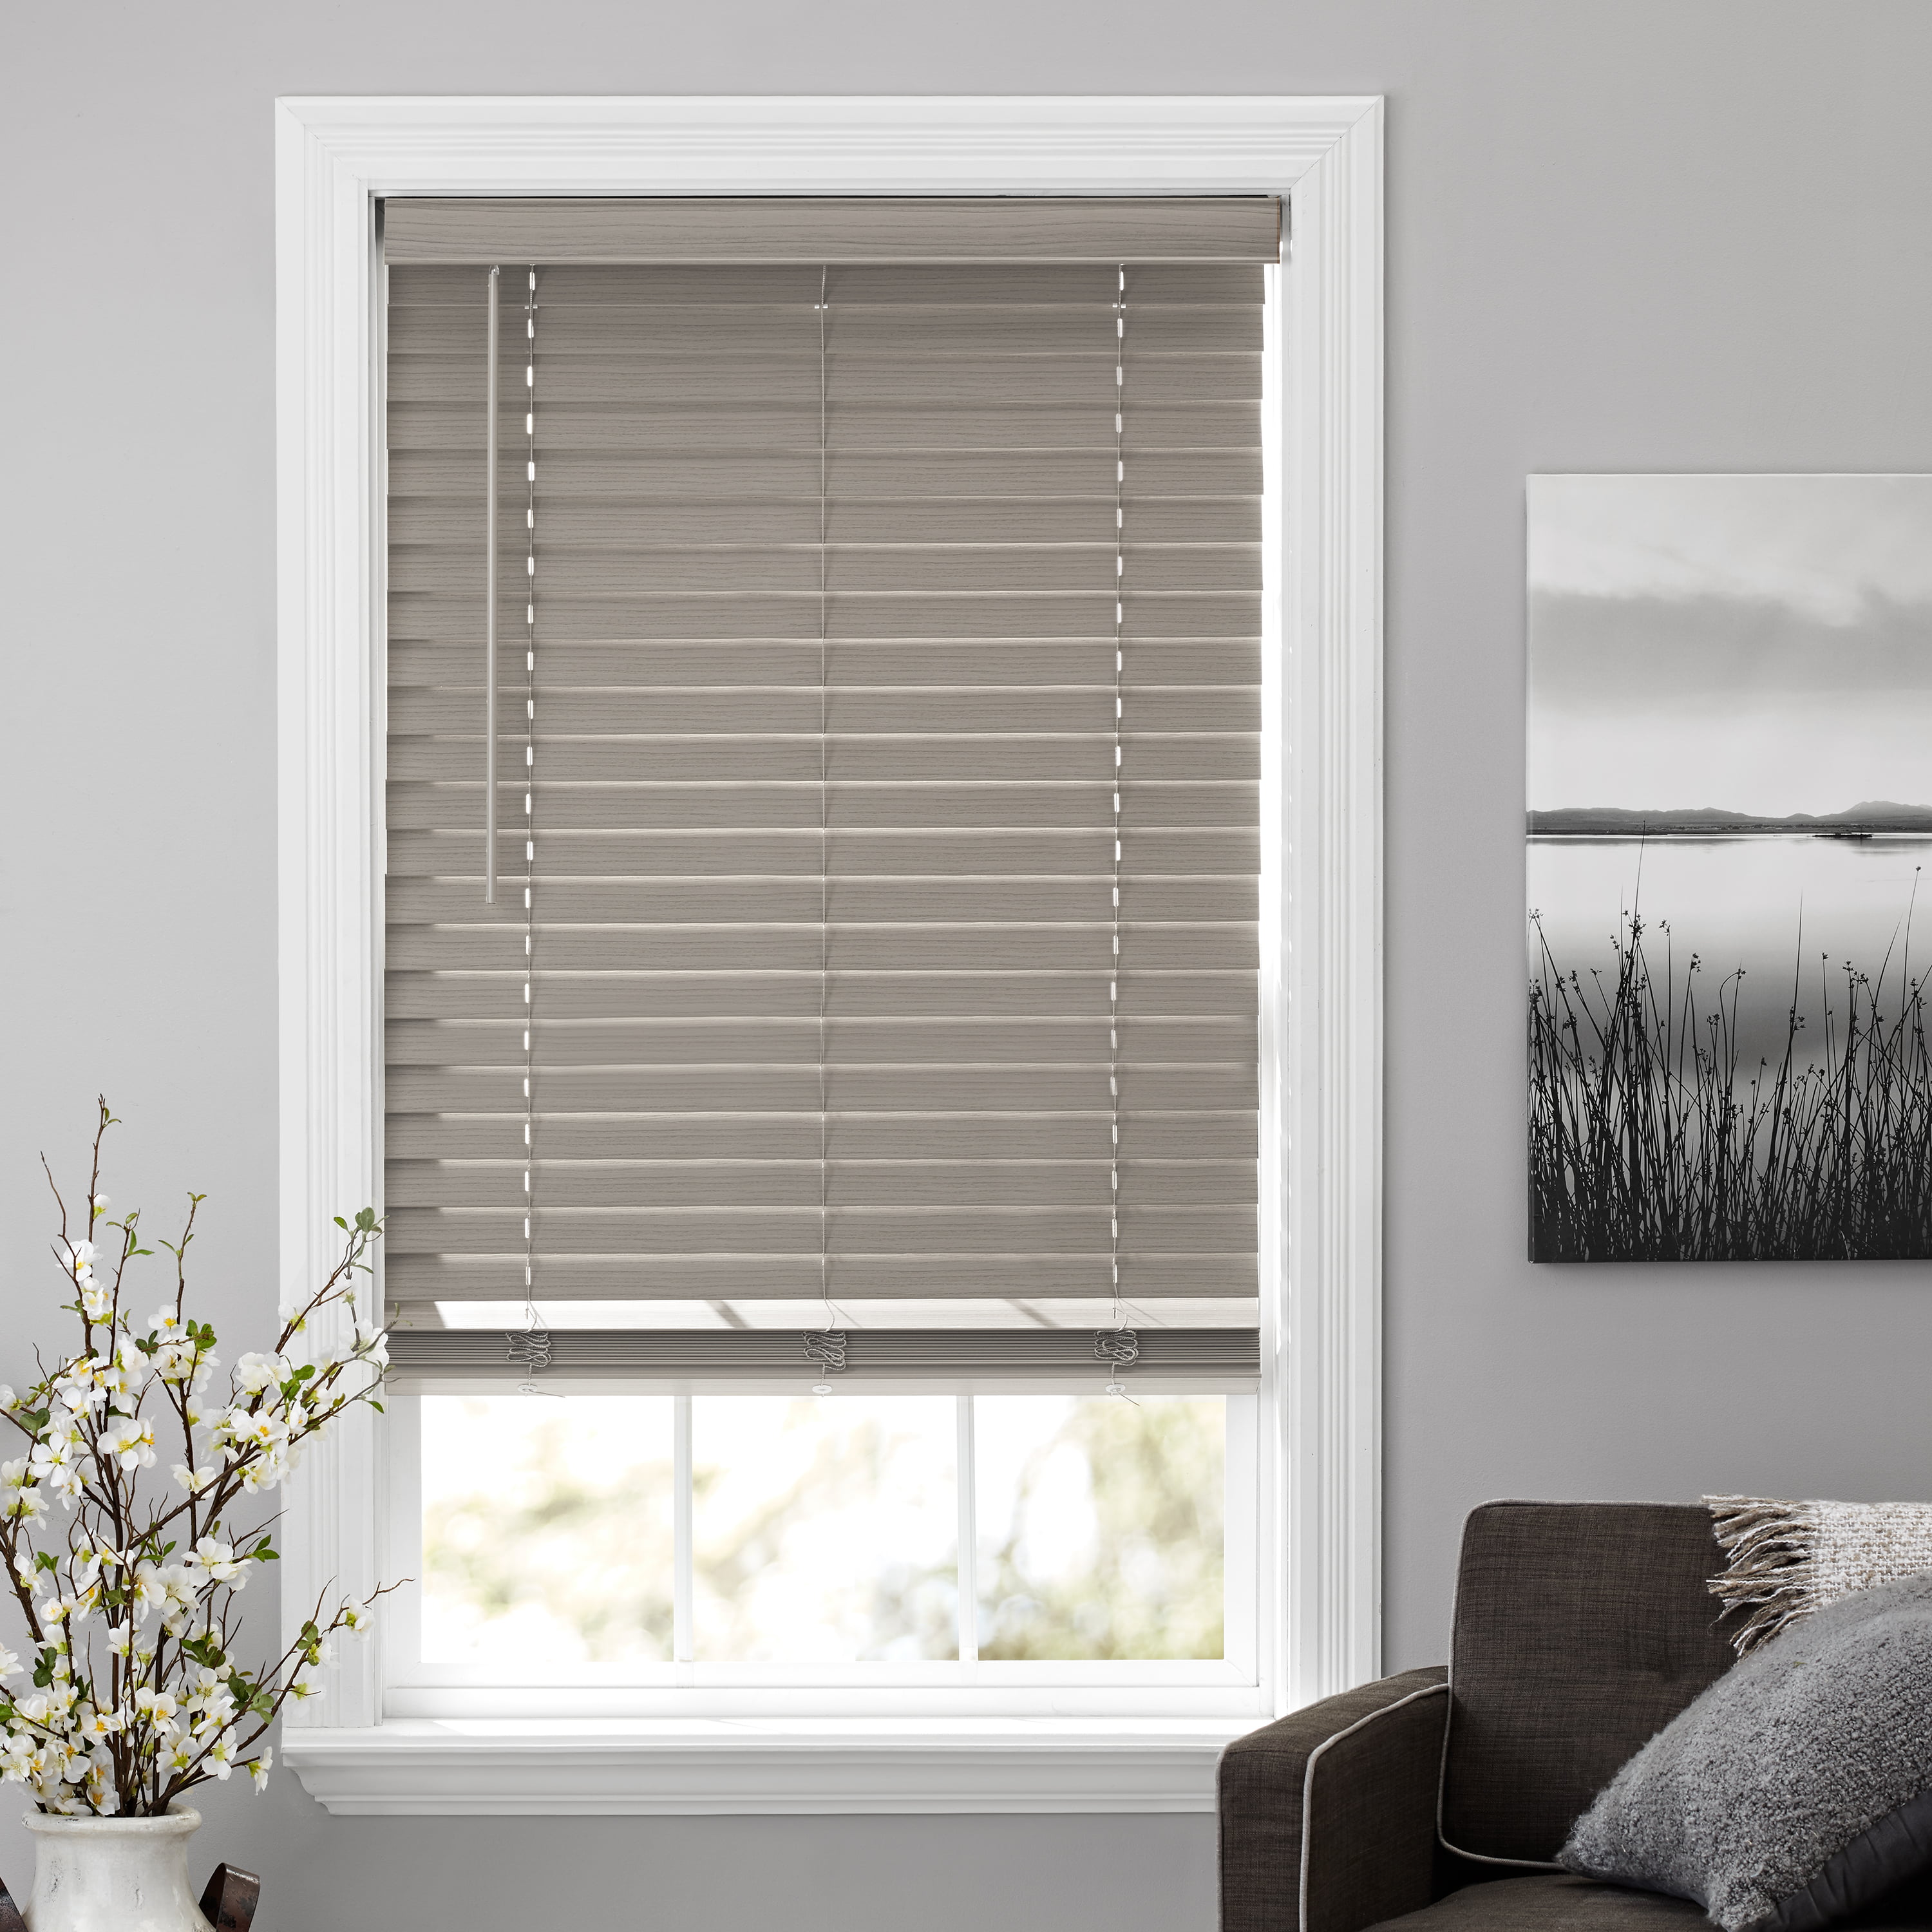 Details about    2-inch Cordless Faux Wood Blinds Rustic Gray Wood-Grain Texture Room Darkening 